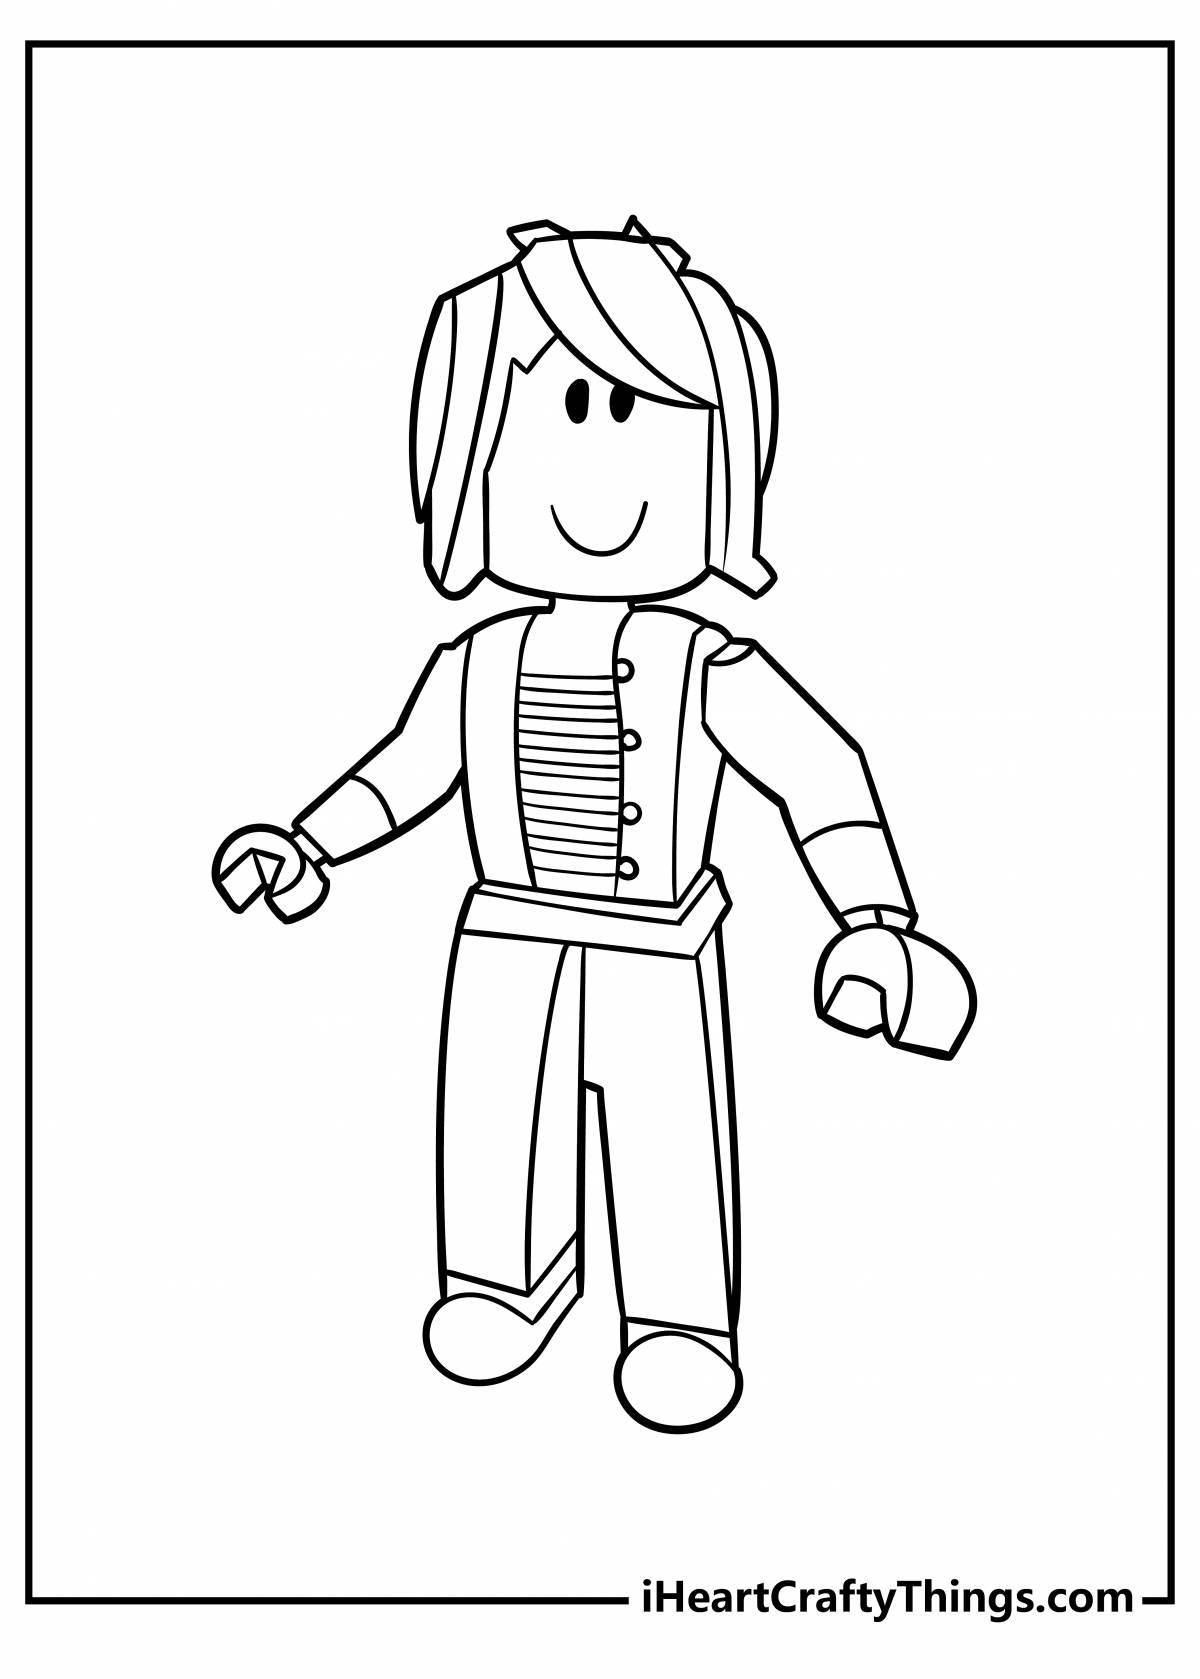 Roblox player colorful coloring page